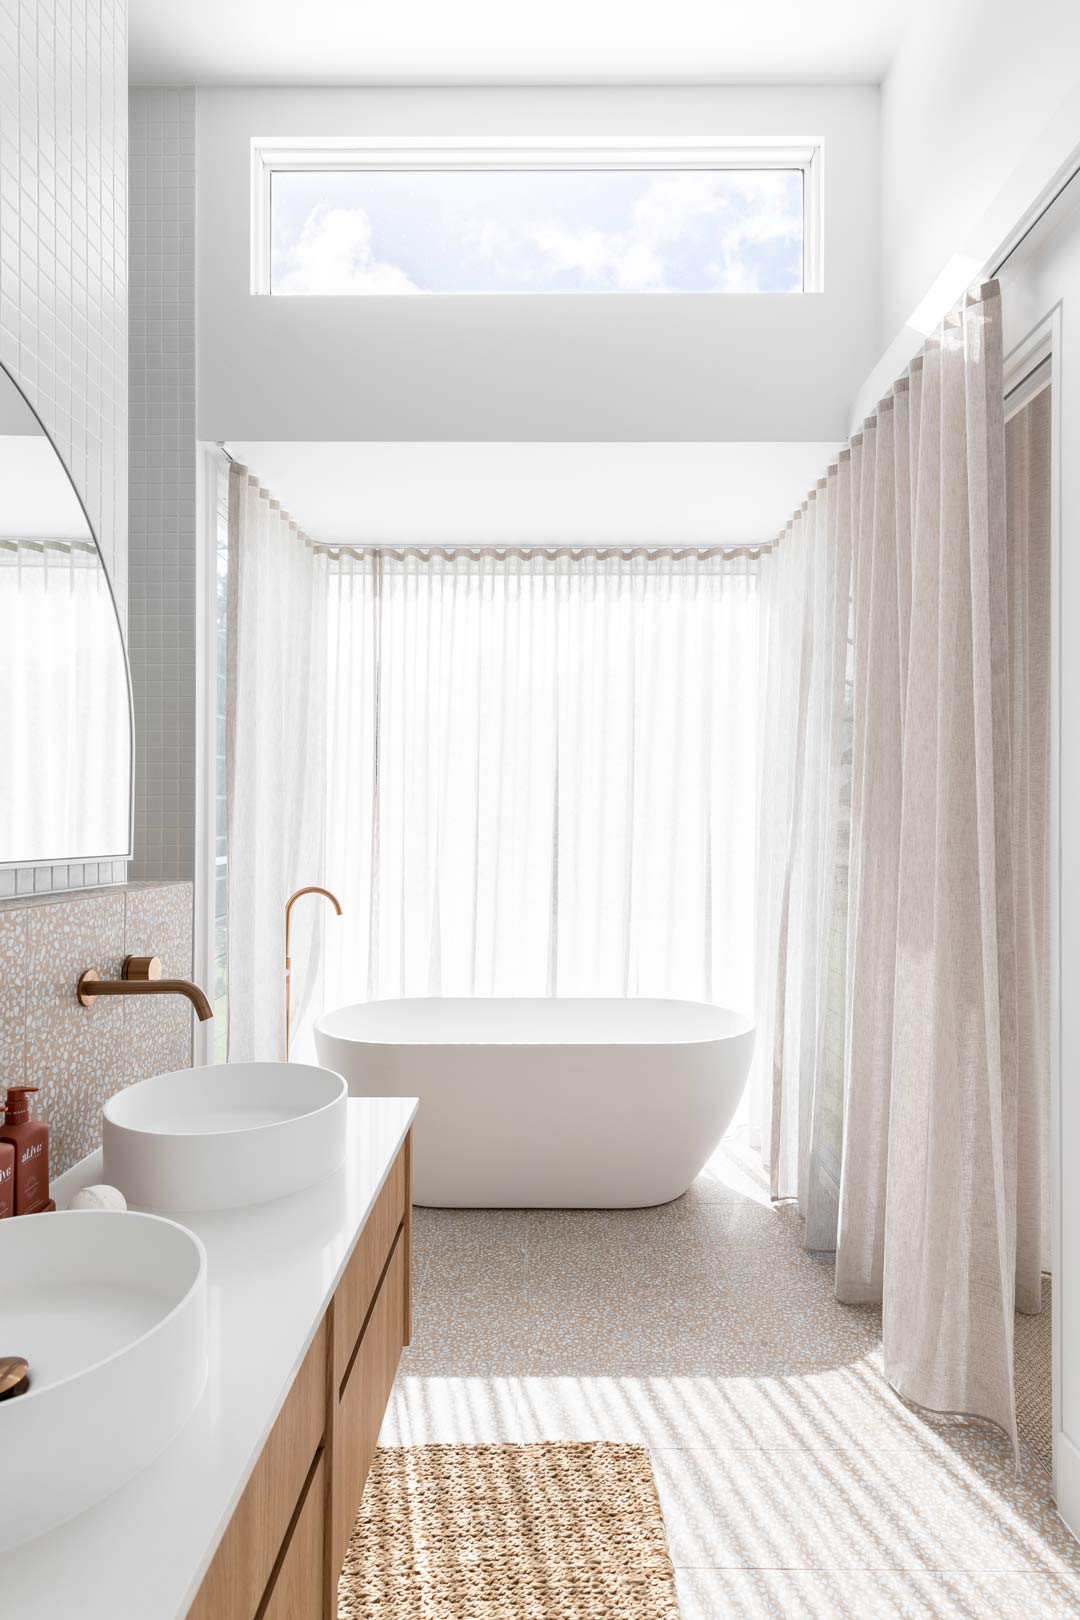 Soft indirect daylighting brightening this bathroom through large windows with sheer curtains and clerestories